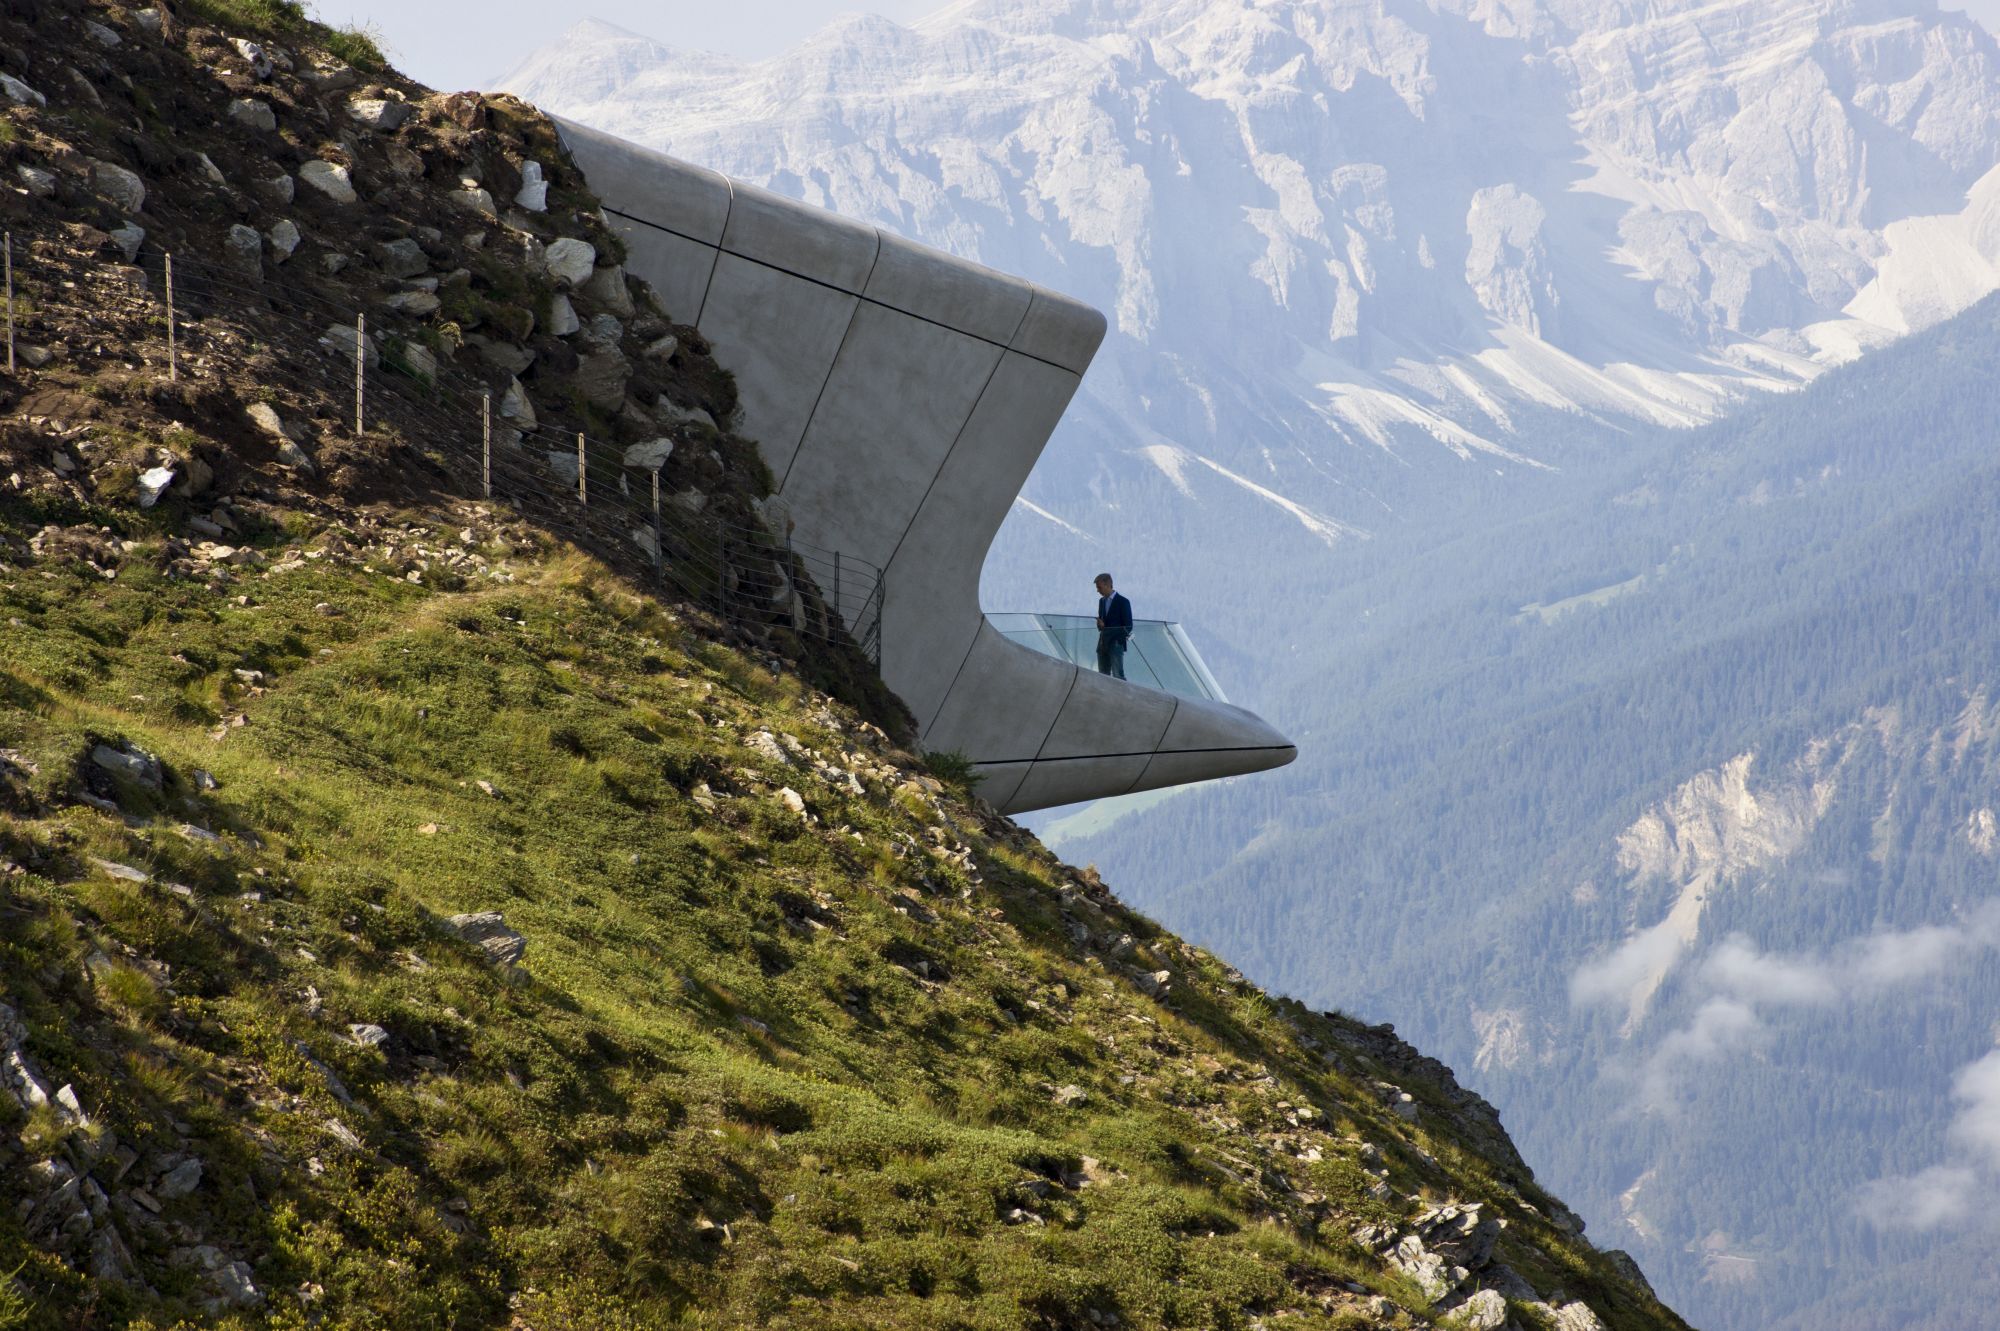 Architecture that's worth the hike